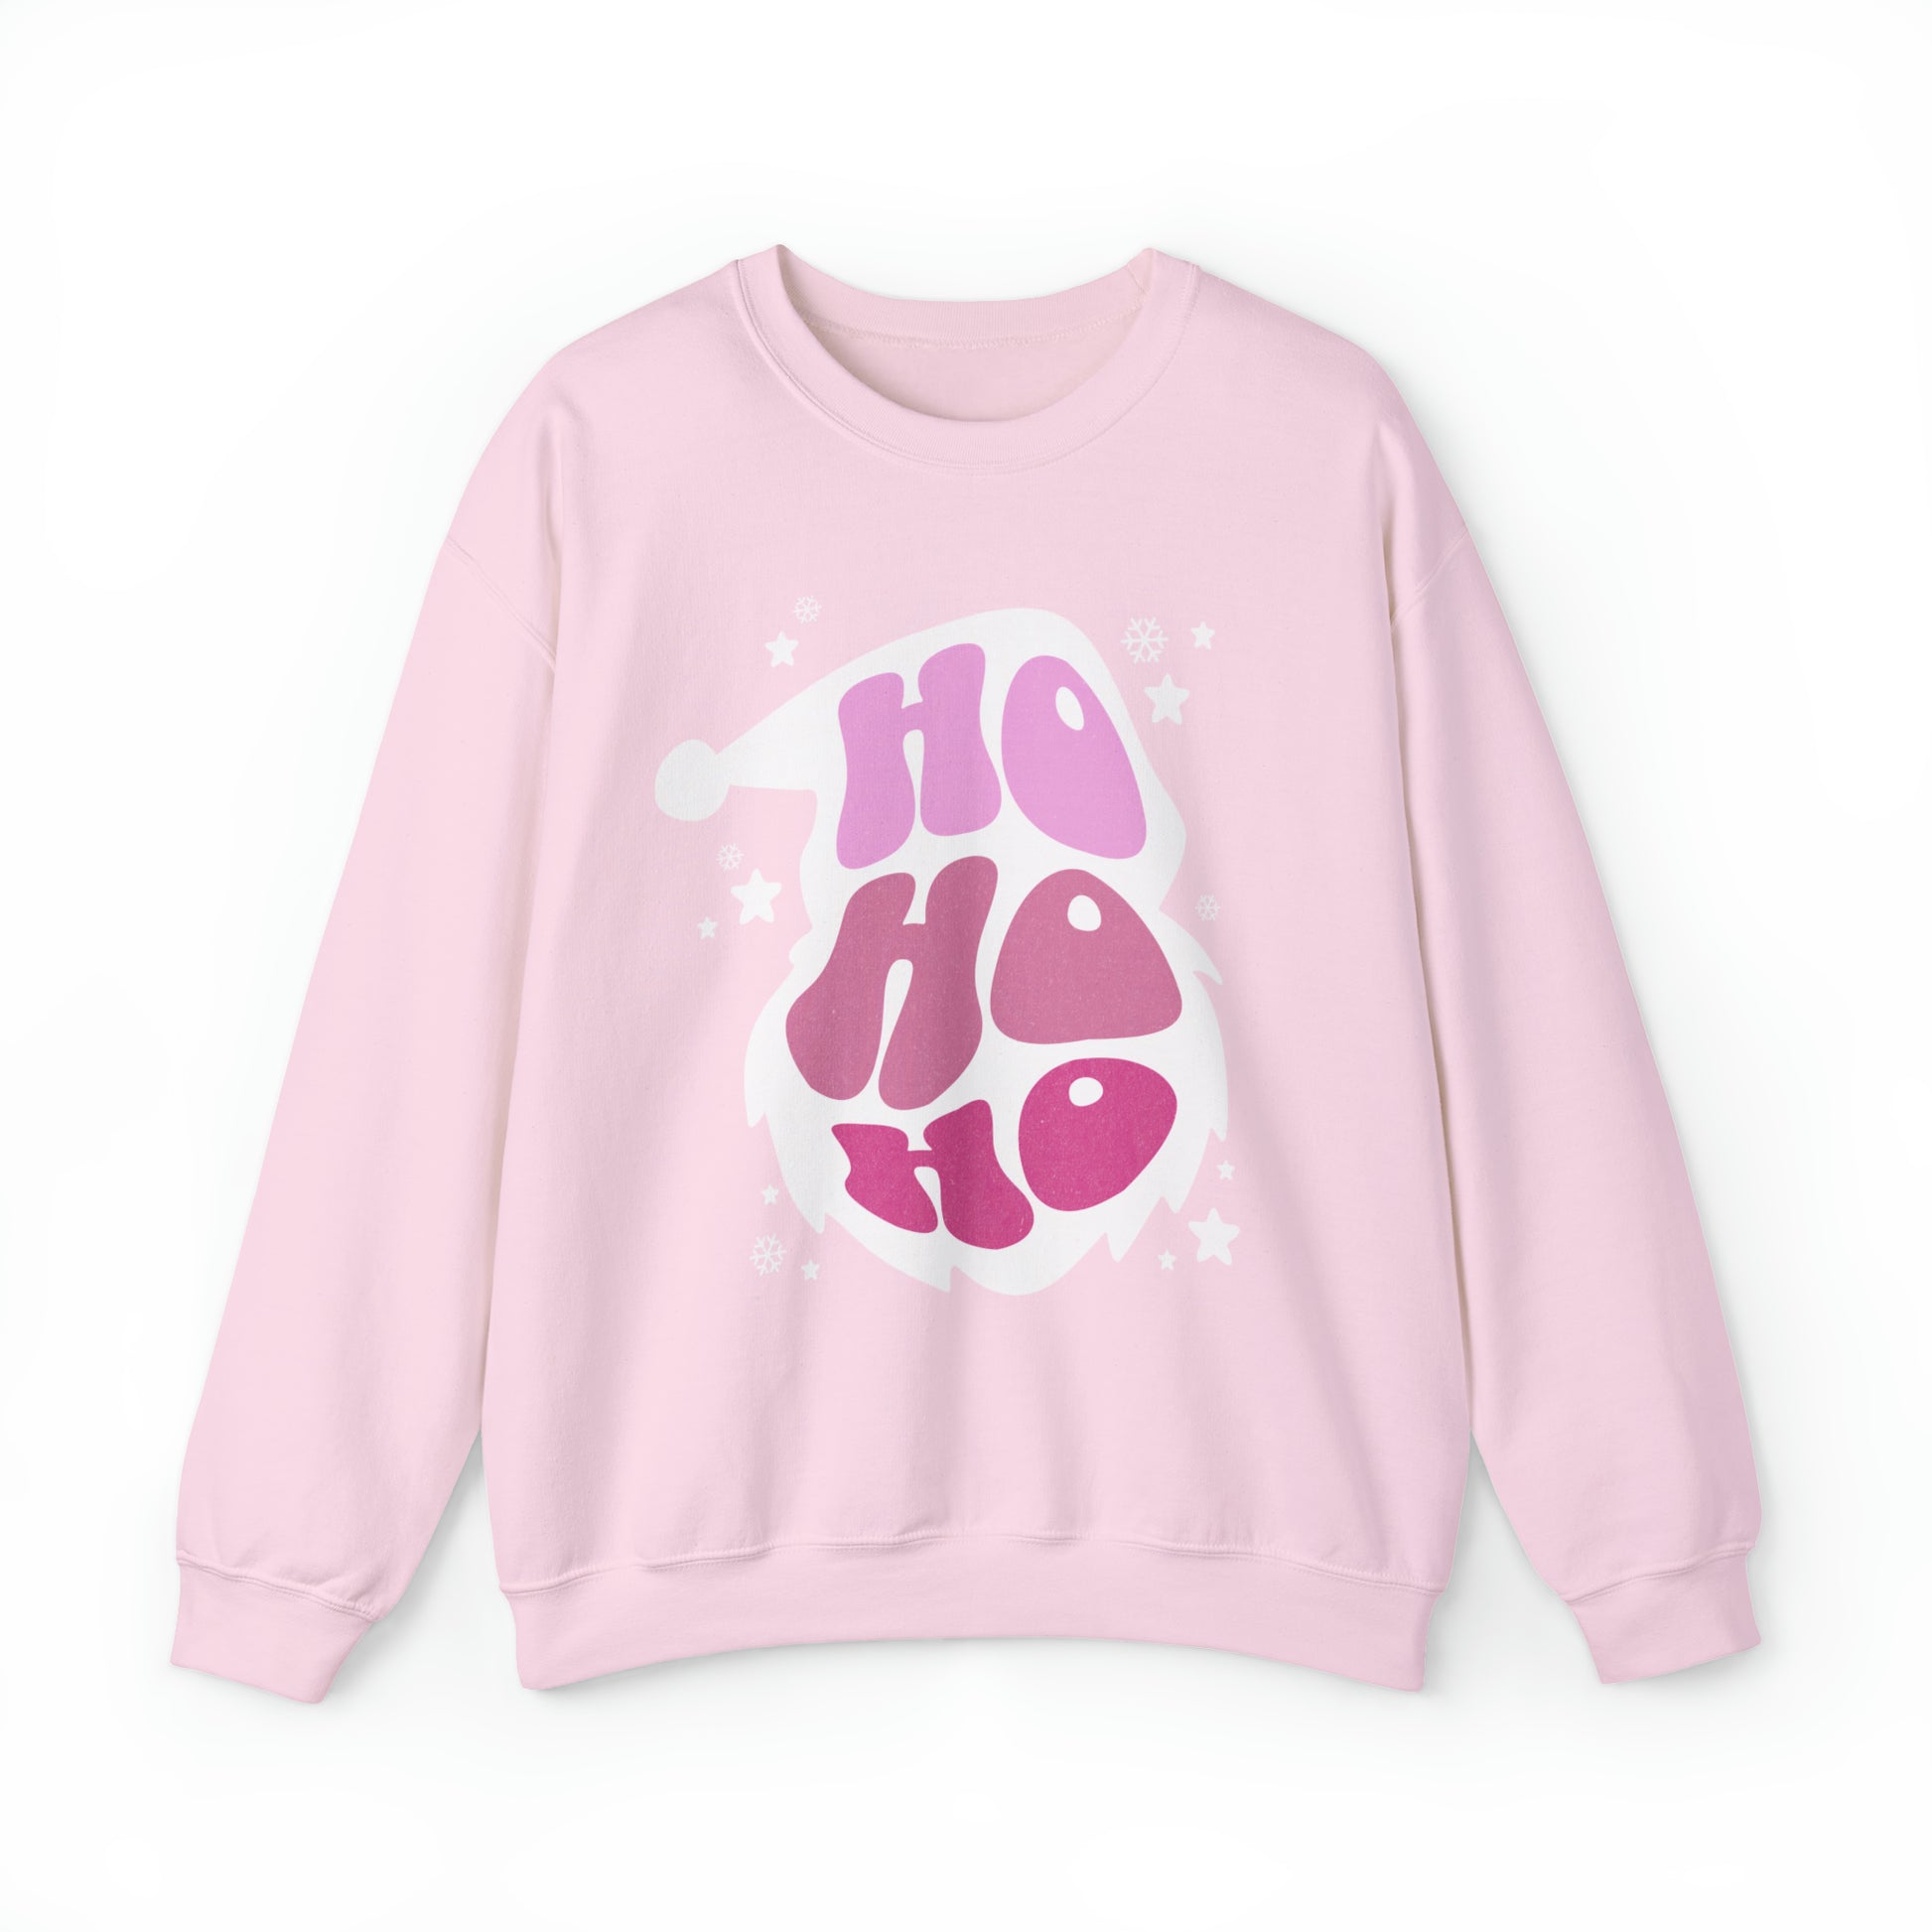 An effortlessly comfortable Ho Ho Ho Santa Outline Pink Holiday Sweatshirt - Cozy Crewneck - Festive Christmas Sweater with a stylish touch of the word ho ho on it, made by Printify.